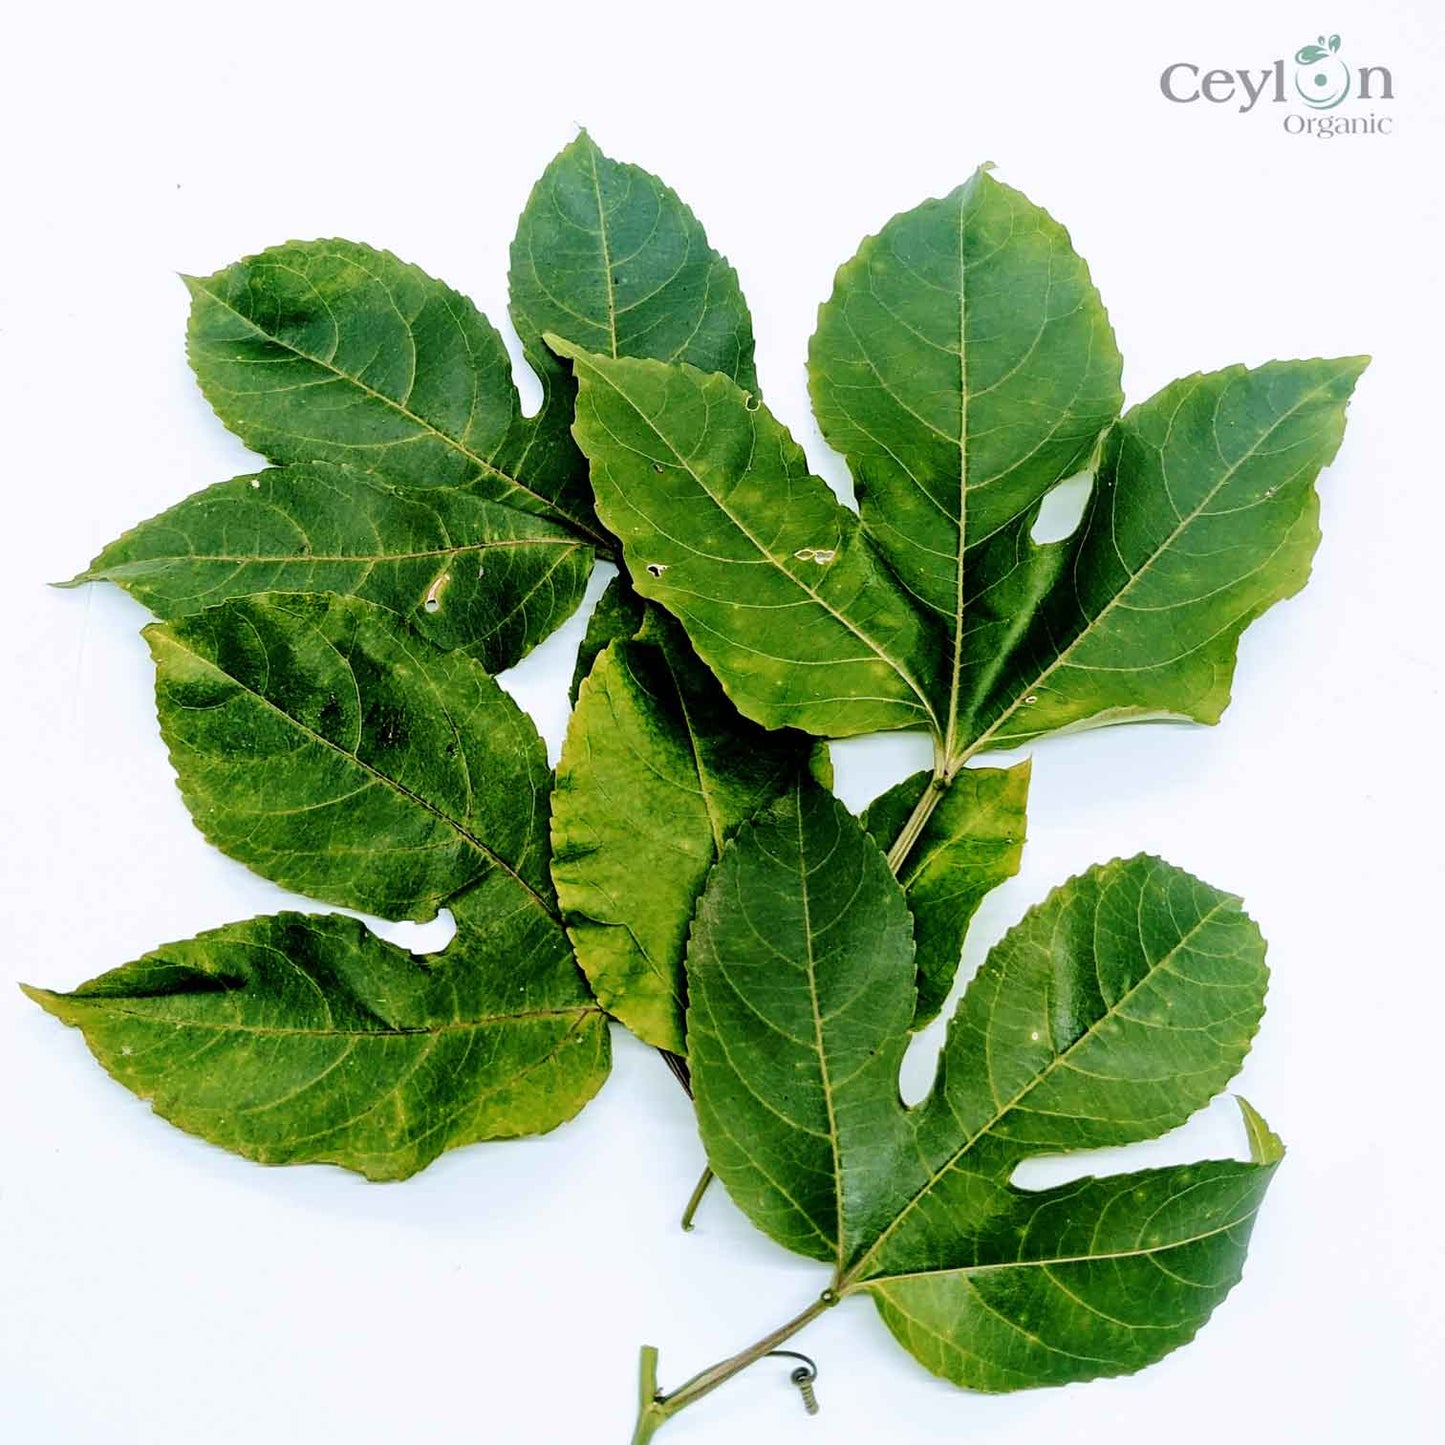 500+ Passion Fruit,Dried Passion Fruit Leaves,Dried Natural Passion Fruit Leaves | Ceylon organic-0